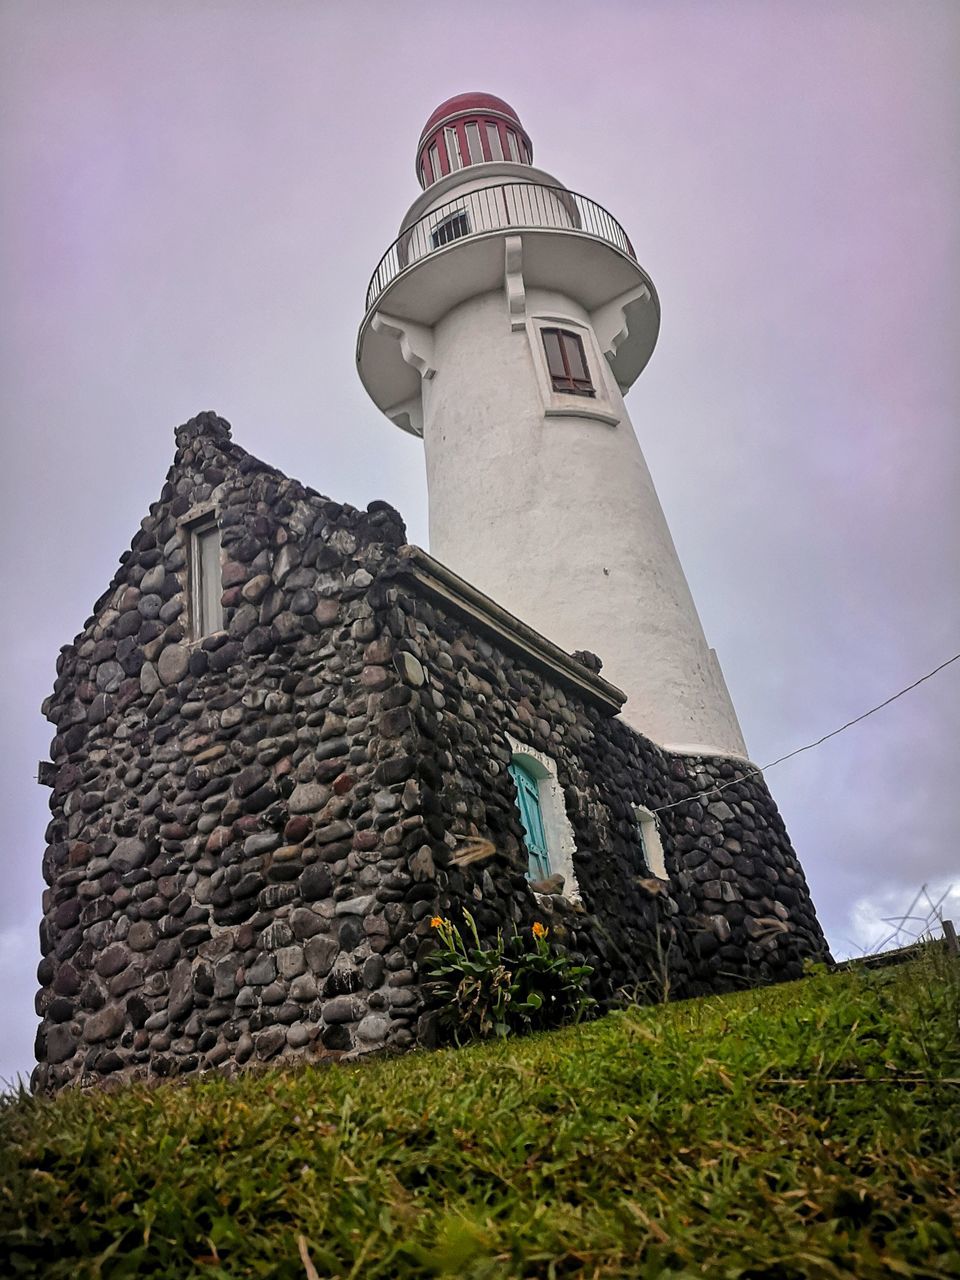 architecture, lighthouse, built structure, building exterior, tower, sky, building, low angle view, guidance, history, nature, the past, no people, travel destinations, security, protection, plant, cloud, outdoors, house, landmark, day, travel, grass